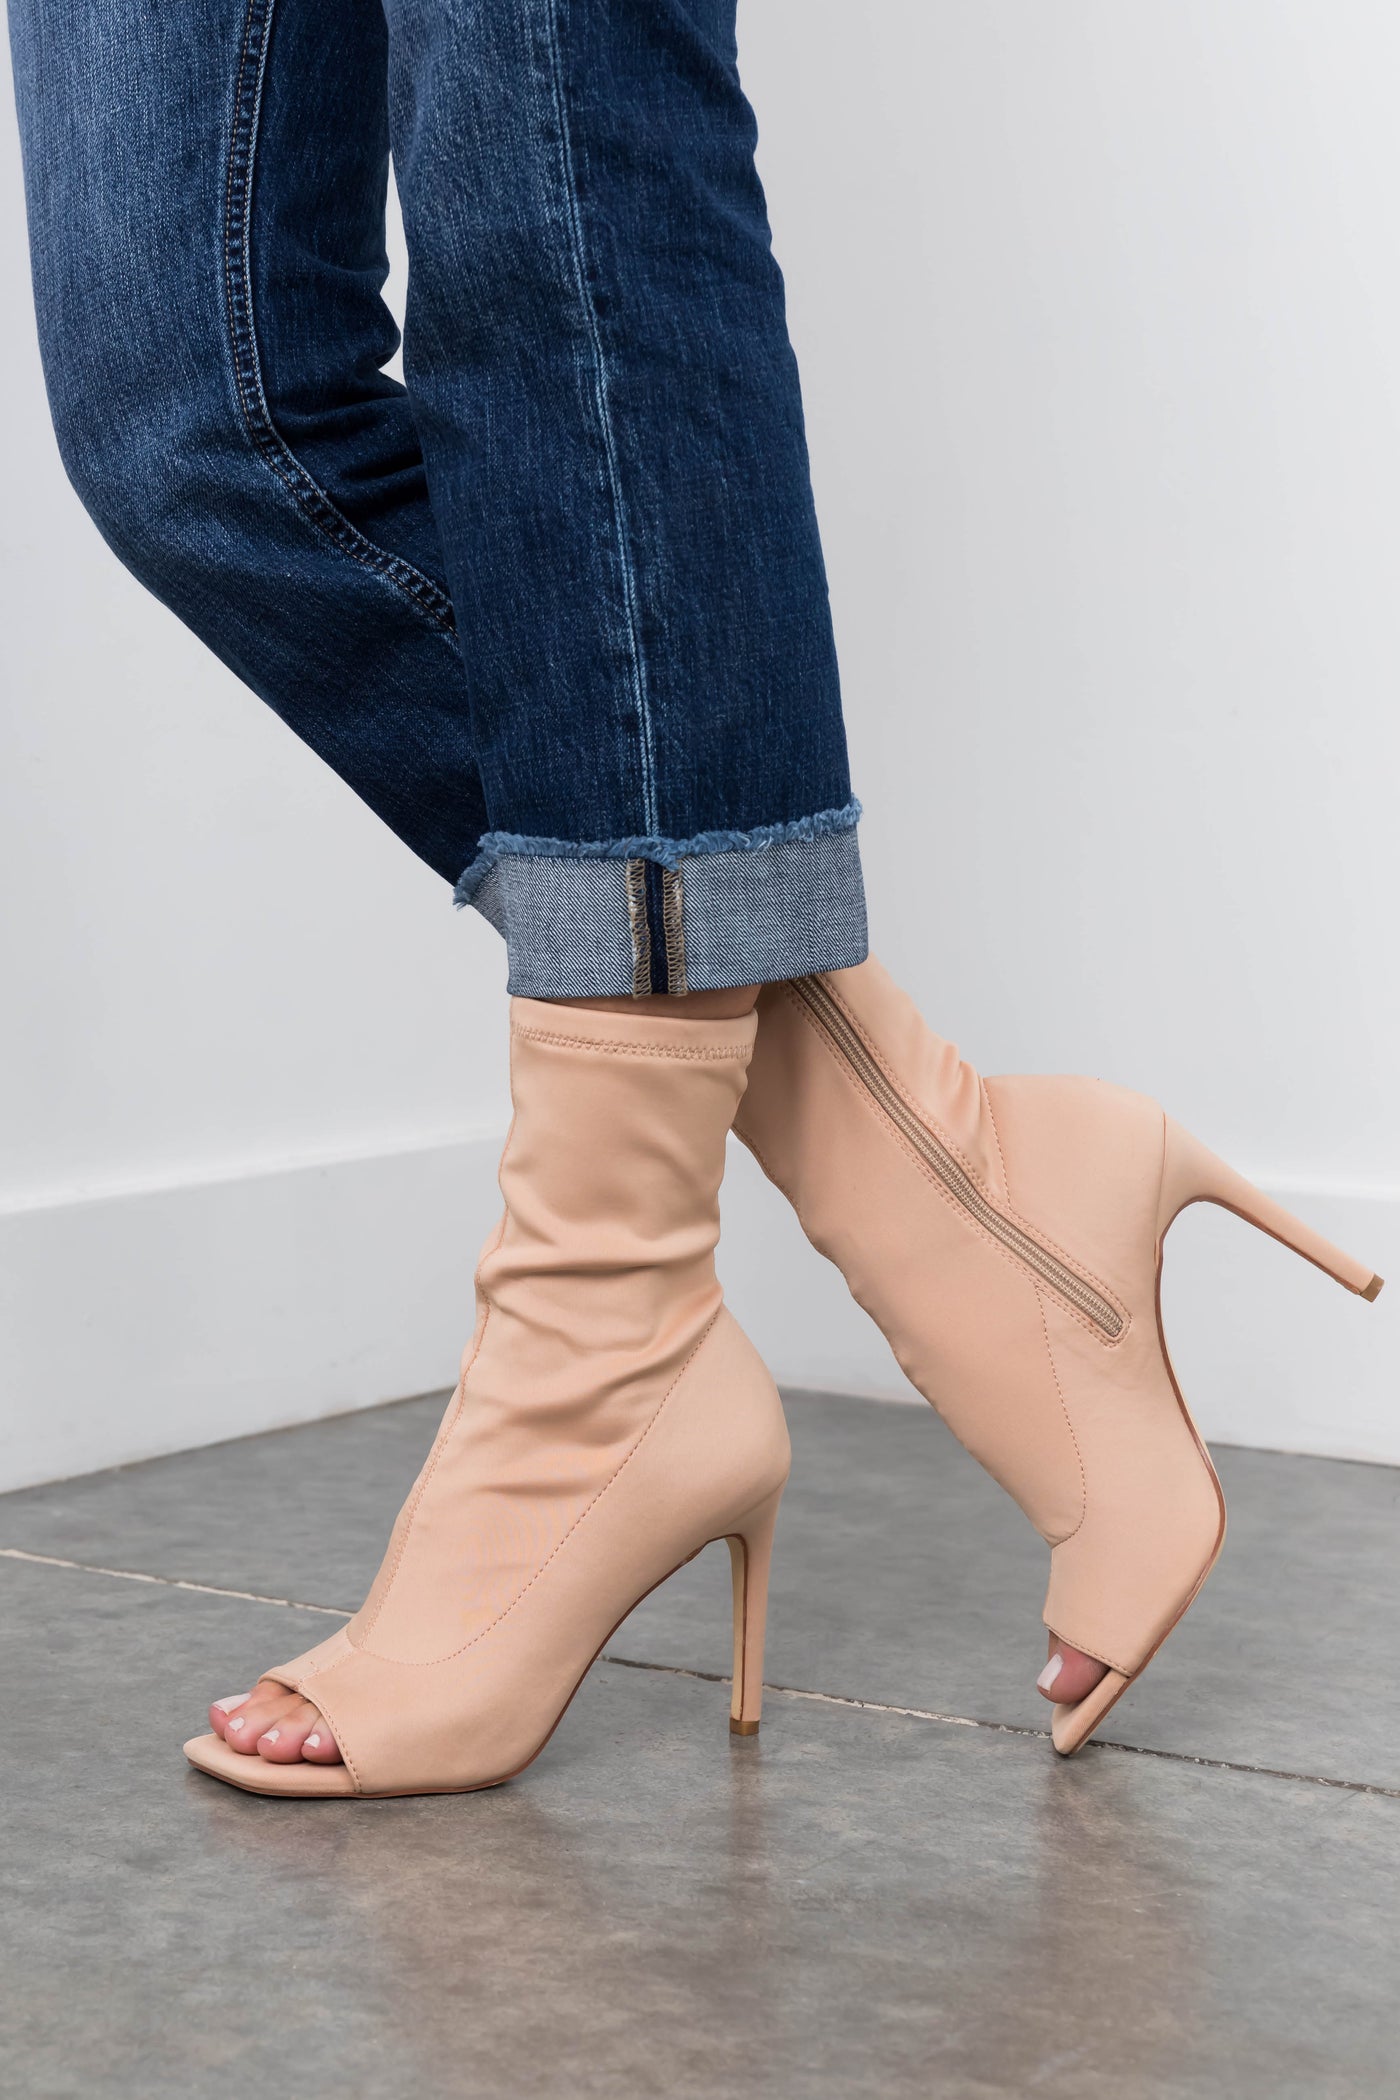 Nude Open Toe Stretchy Knit Stiletto Booties